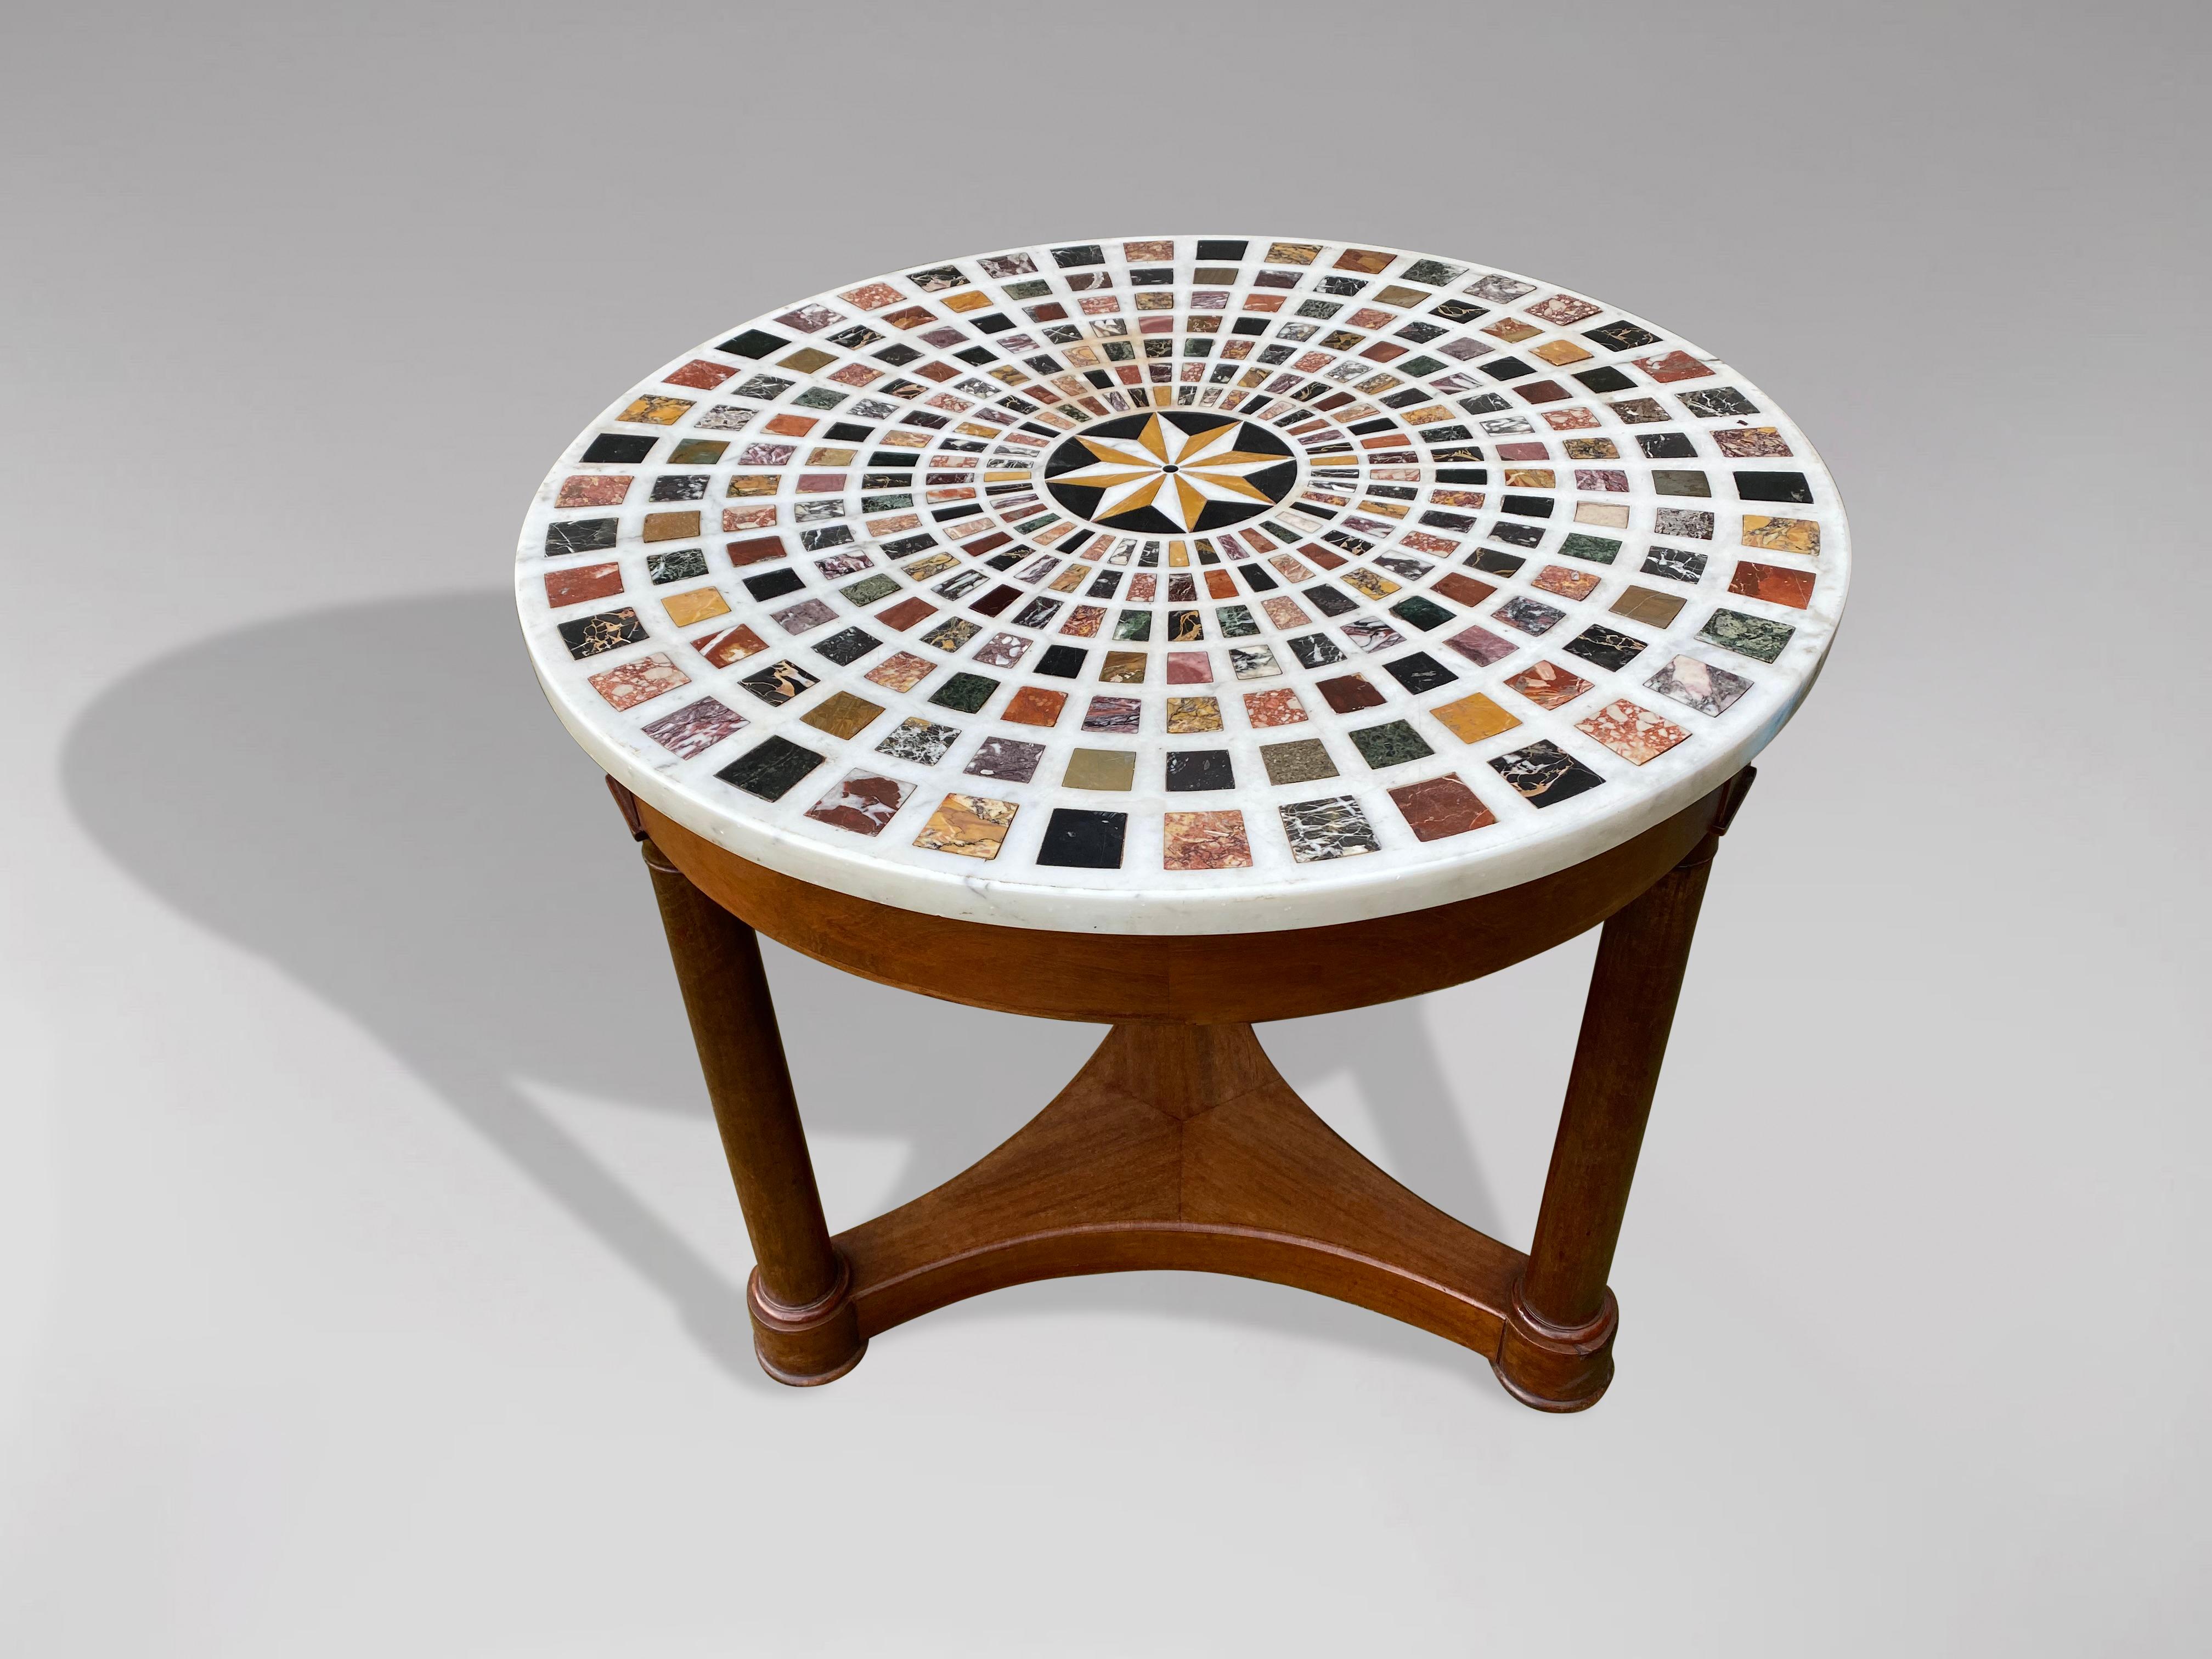 A stunning mid 19th century, Italian specimen marble top and micro mosaic centre table, the radiating sections of marble and semi-precious stones including lapis lazuli, malachite, siena and portor marbles, within a white veined marble outer border,